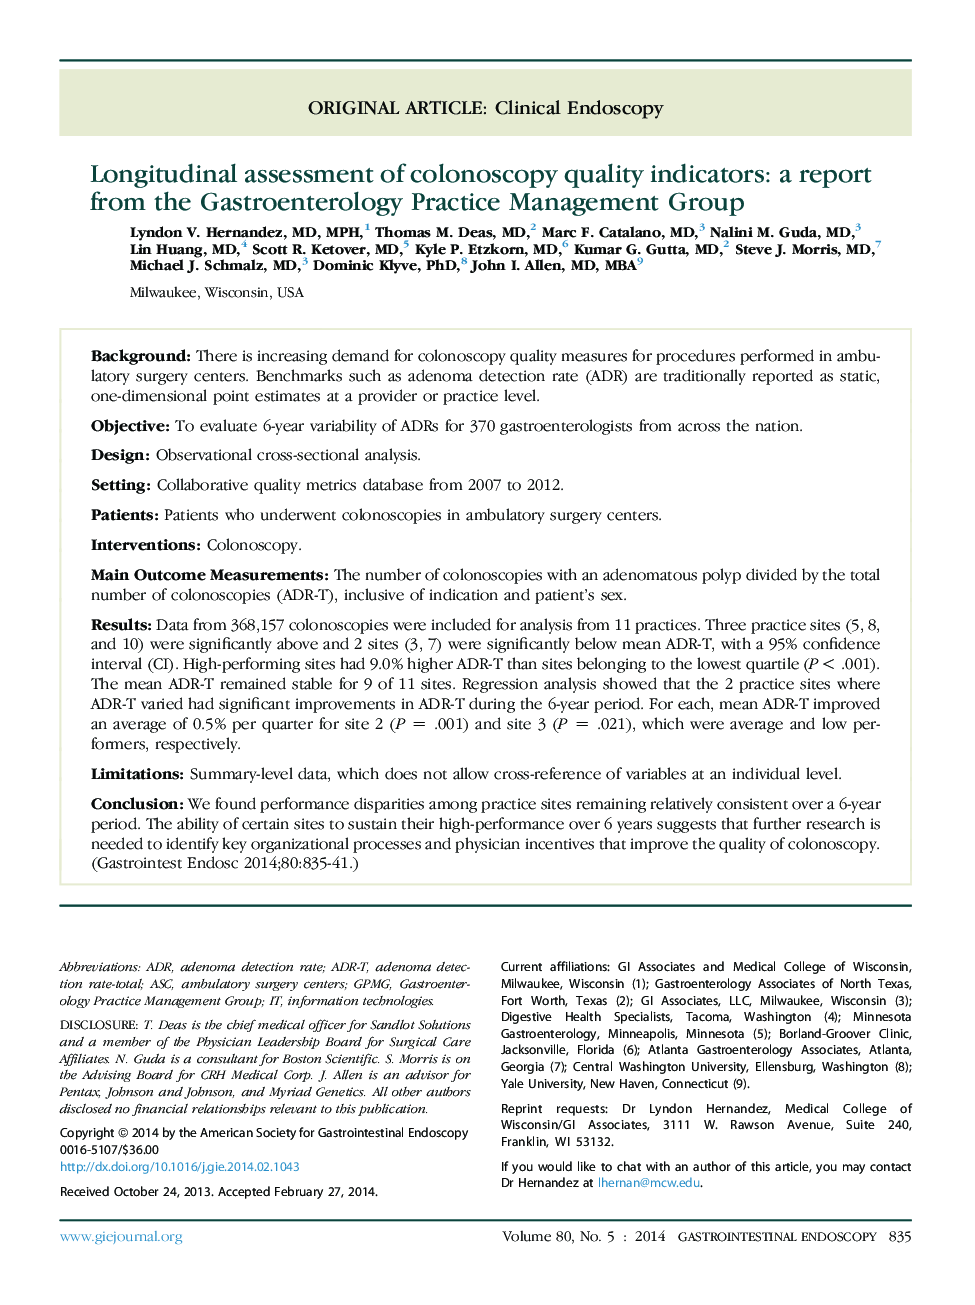 Longitudinal assessment of colonoscopy quality indicators: a report from the Gastroenterology Practice Management Group 